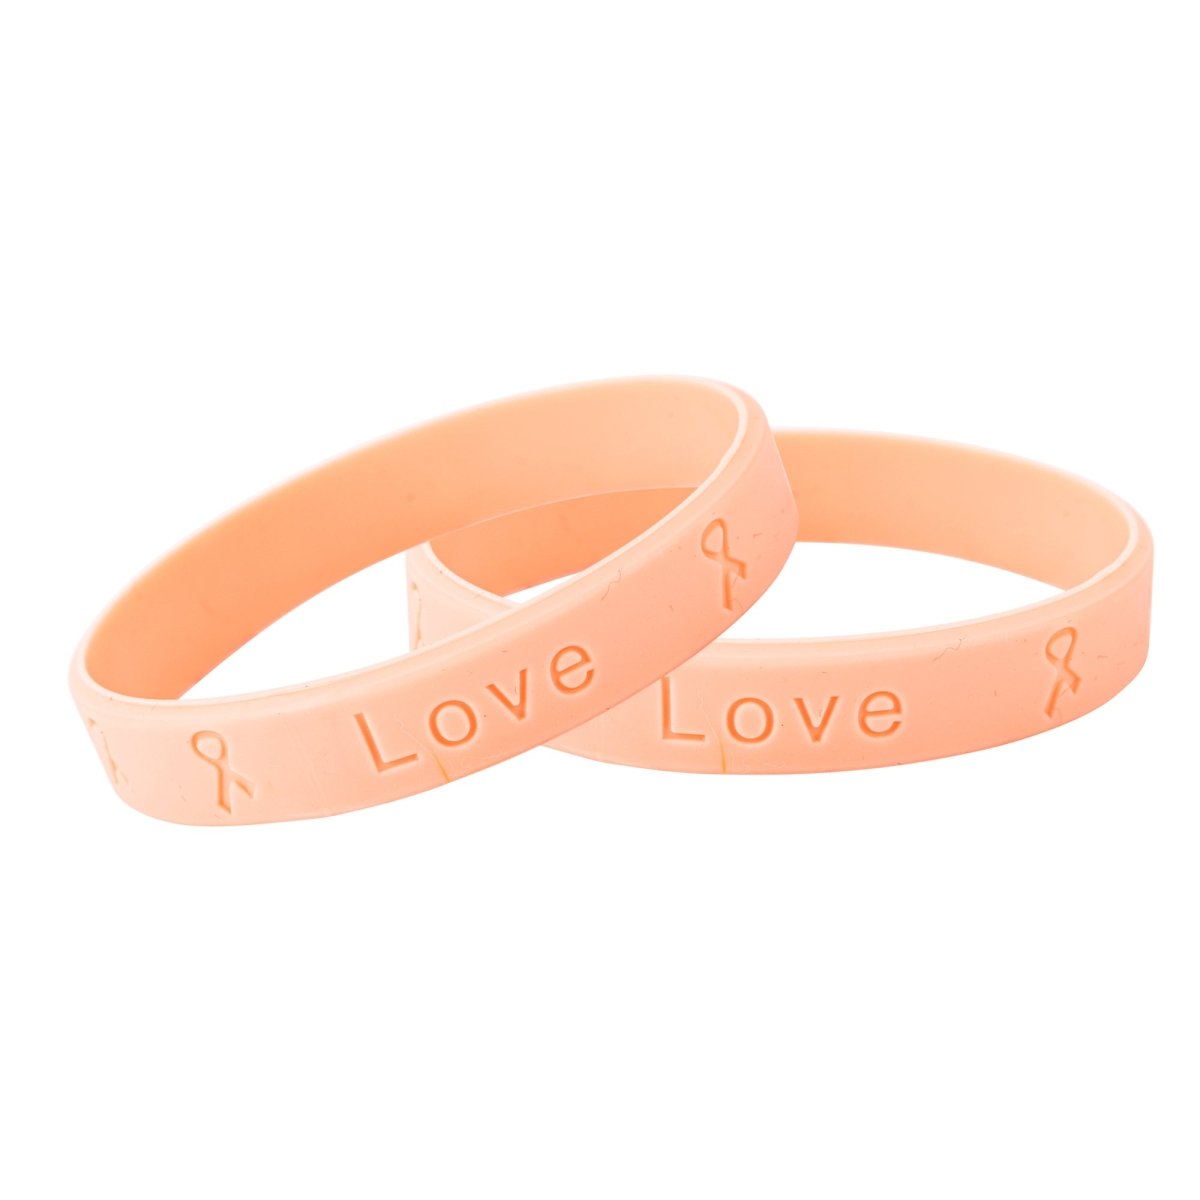 Adult Peach Silicone Bracelet Wristbands - Fundraising For A Cause